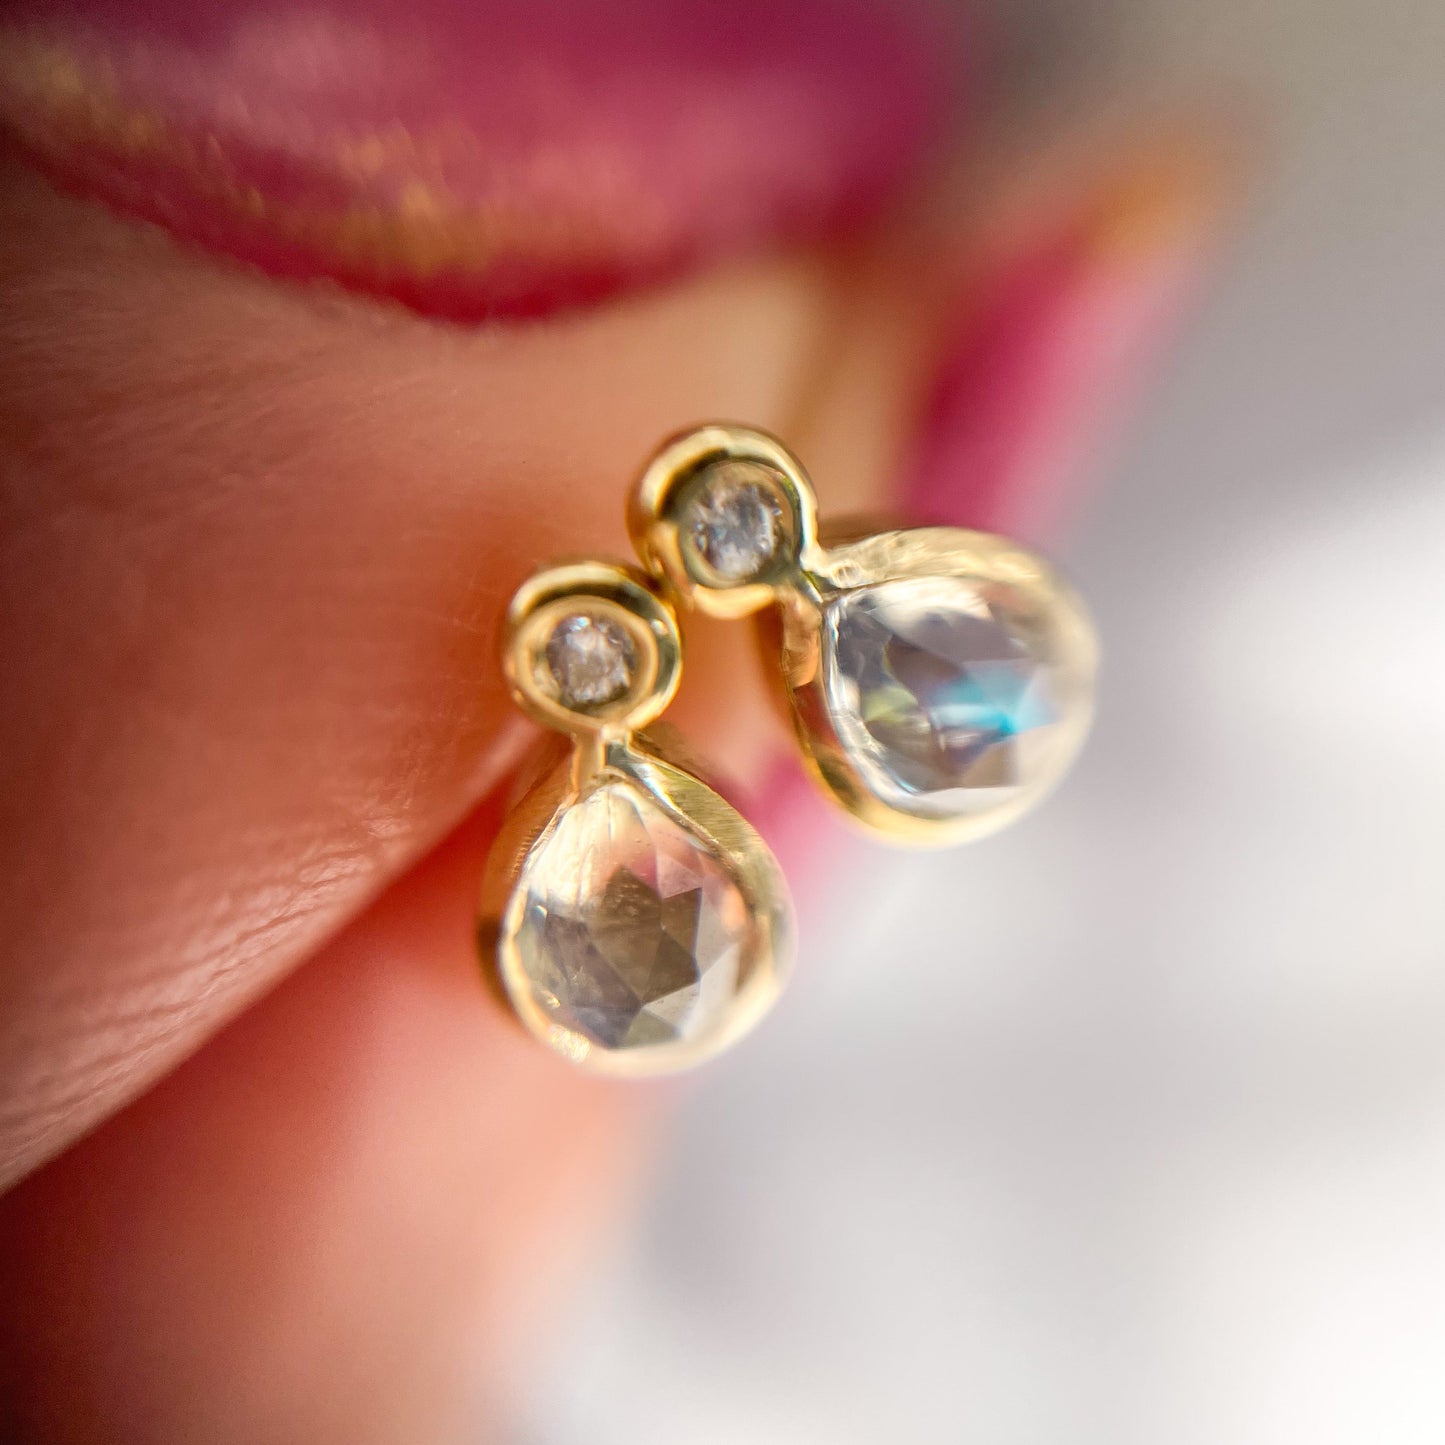 Moonstone Earrings by NIXIN Jewelry shown under magnification and shot from above to show their rose cut faceting. Made in 14k gold.